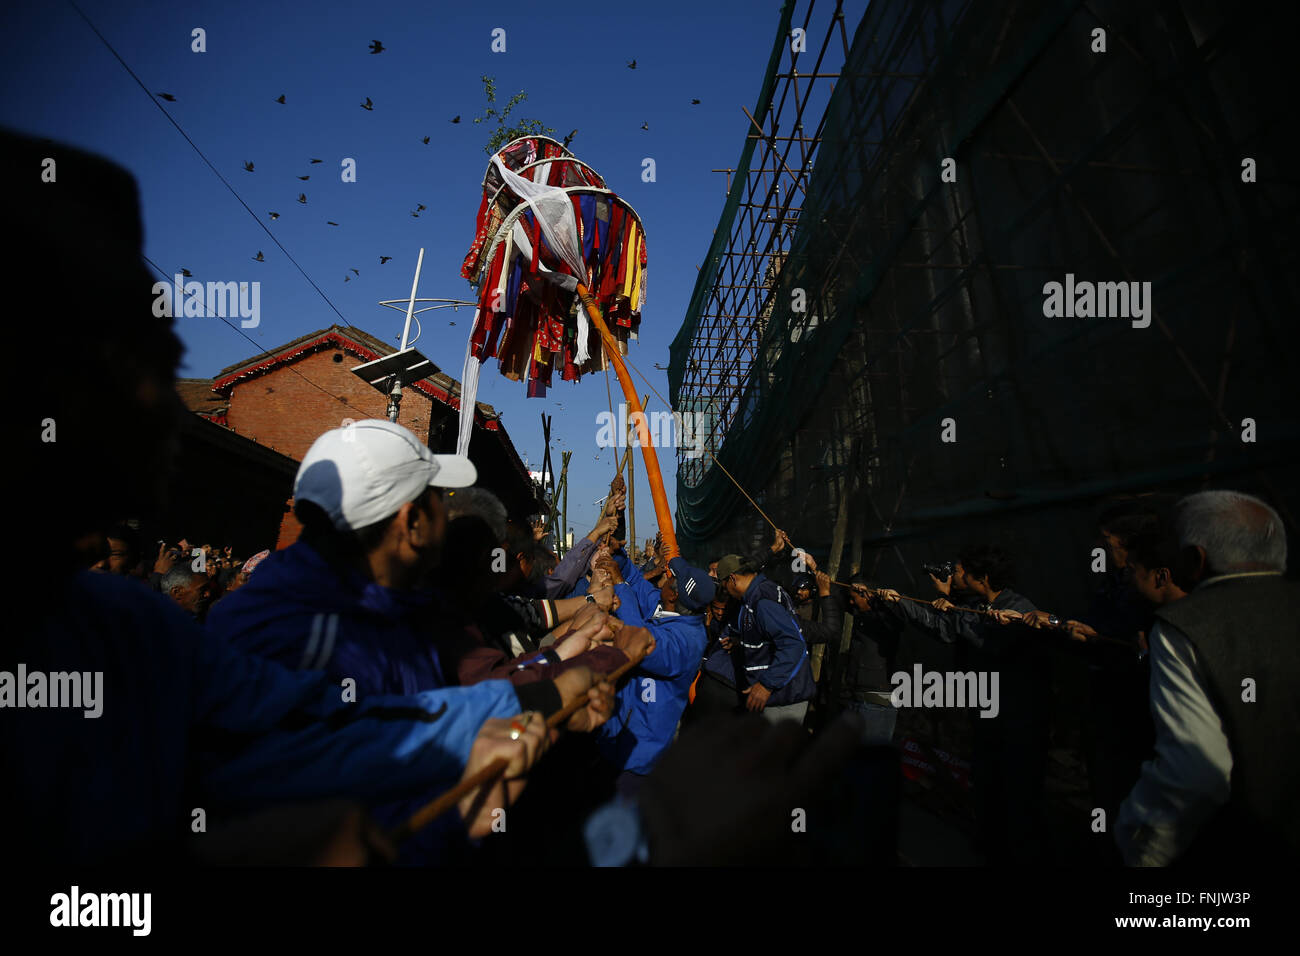 Kathmandu, Nepal. 16th Mar, 2016. Nepalese men raise a bamboo pole known as Chir to commence Holi festival in Basantapur Durbar Square, Kathmandu, Nepal on Wednesday, March 16, 2016. Hindu devotees set up a ceremonial pole to celebrate the first day of the festival. The Holi festival is also known as the festival of colors and is celebrated all over the country. © Skanda Gautam/ZUMA Wire/Alamy Live News Stock Photo